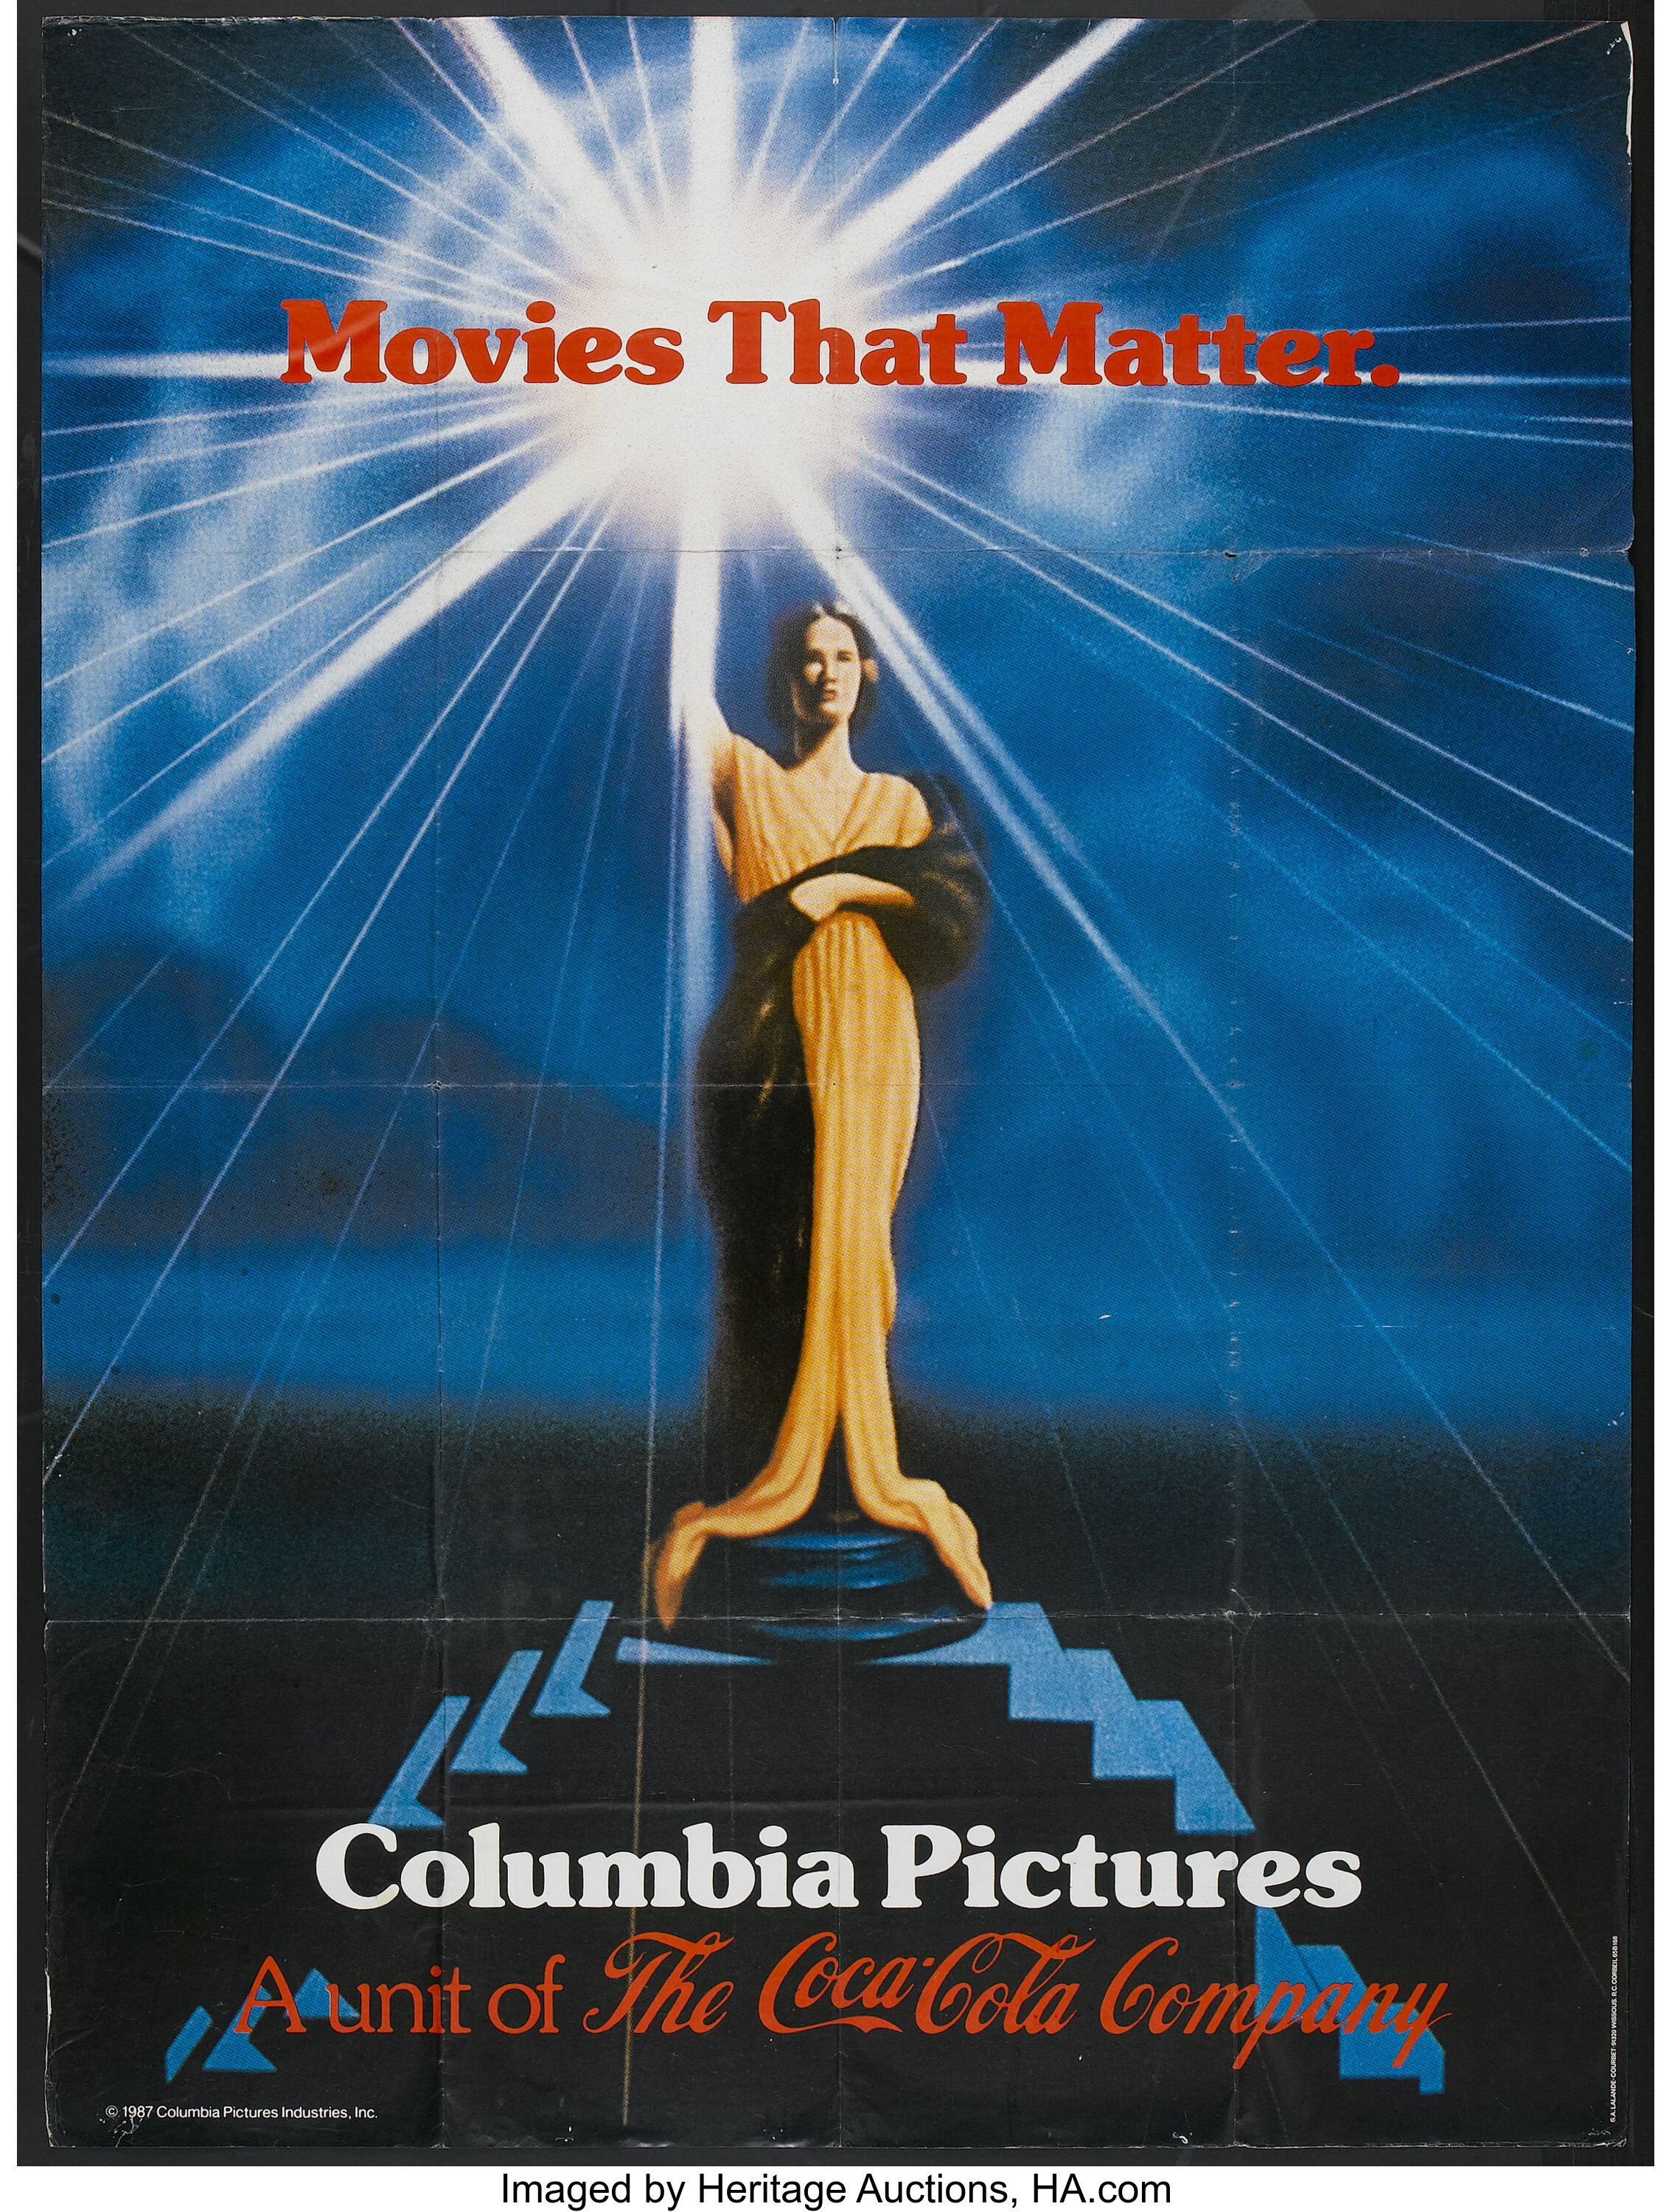 Columbia Pictures Promotional Poster (Columbia, 1987). Poster